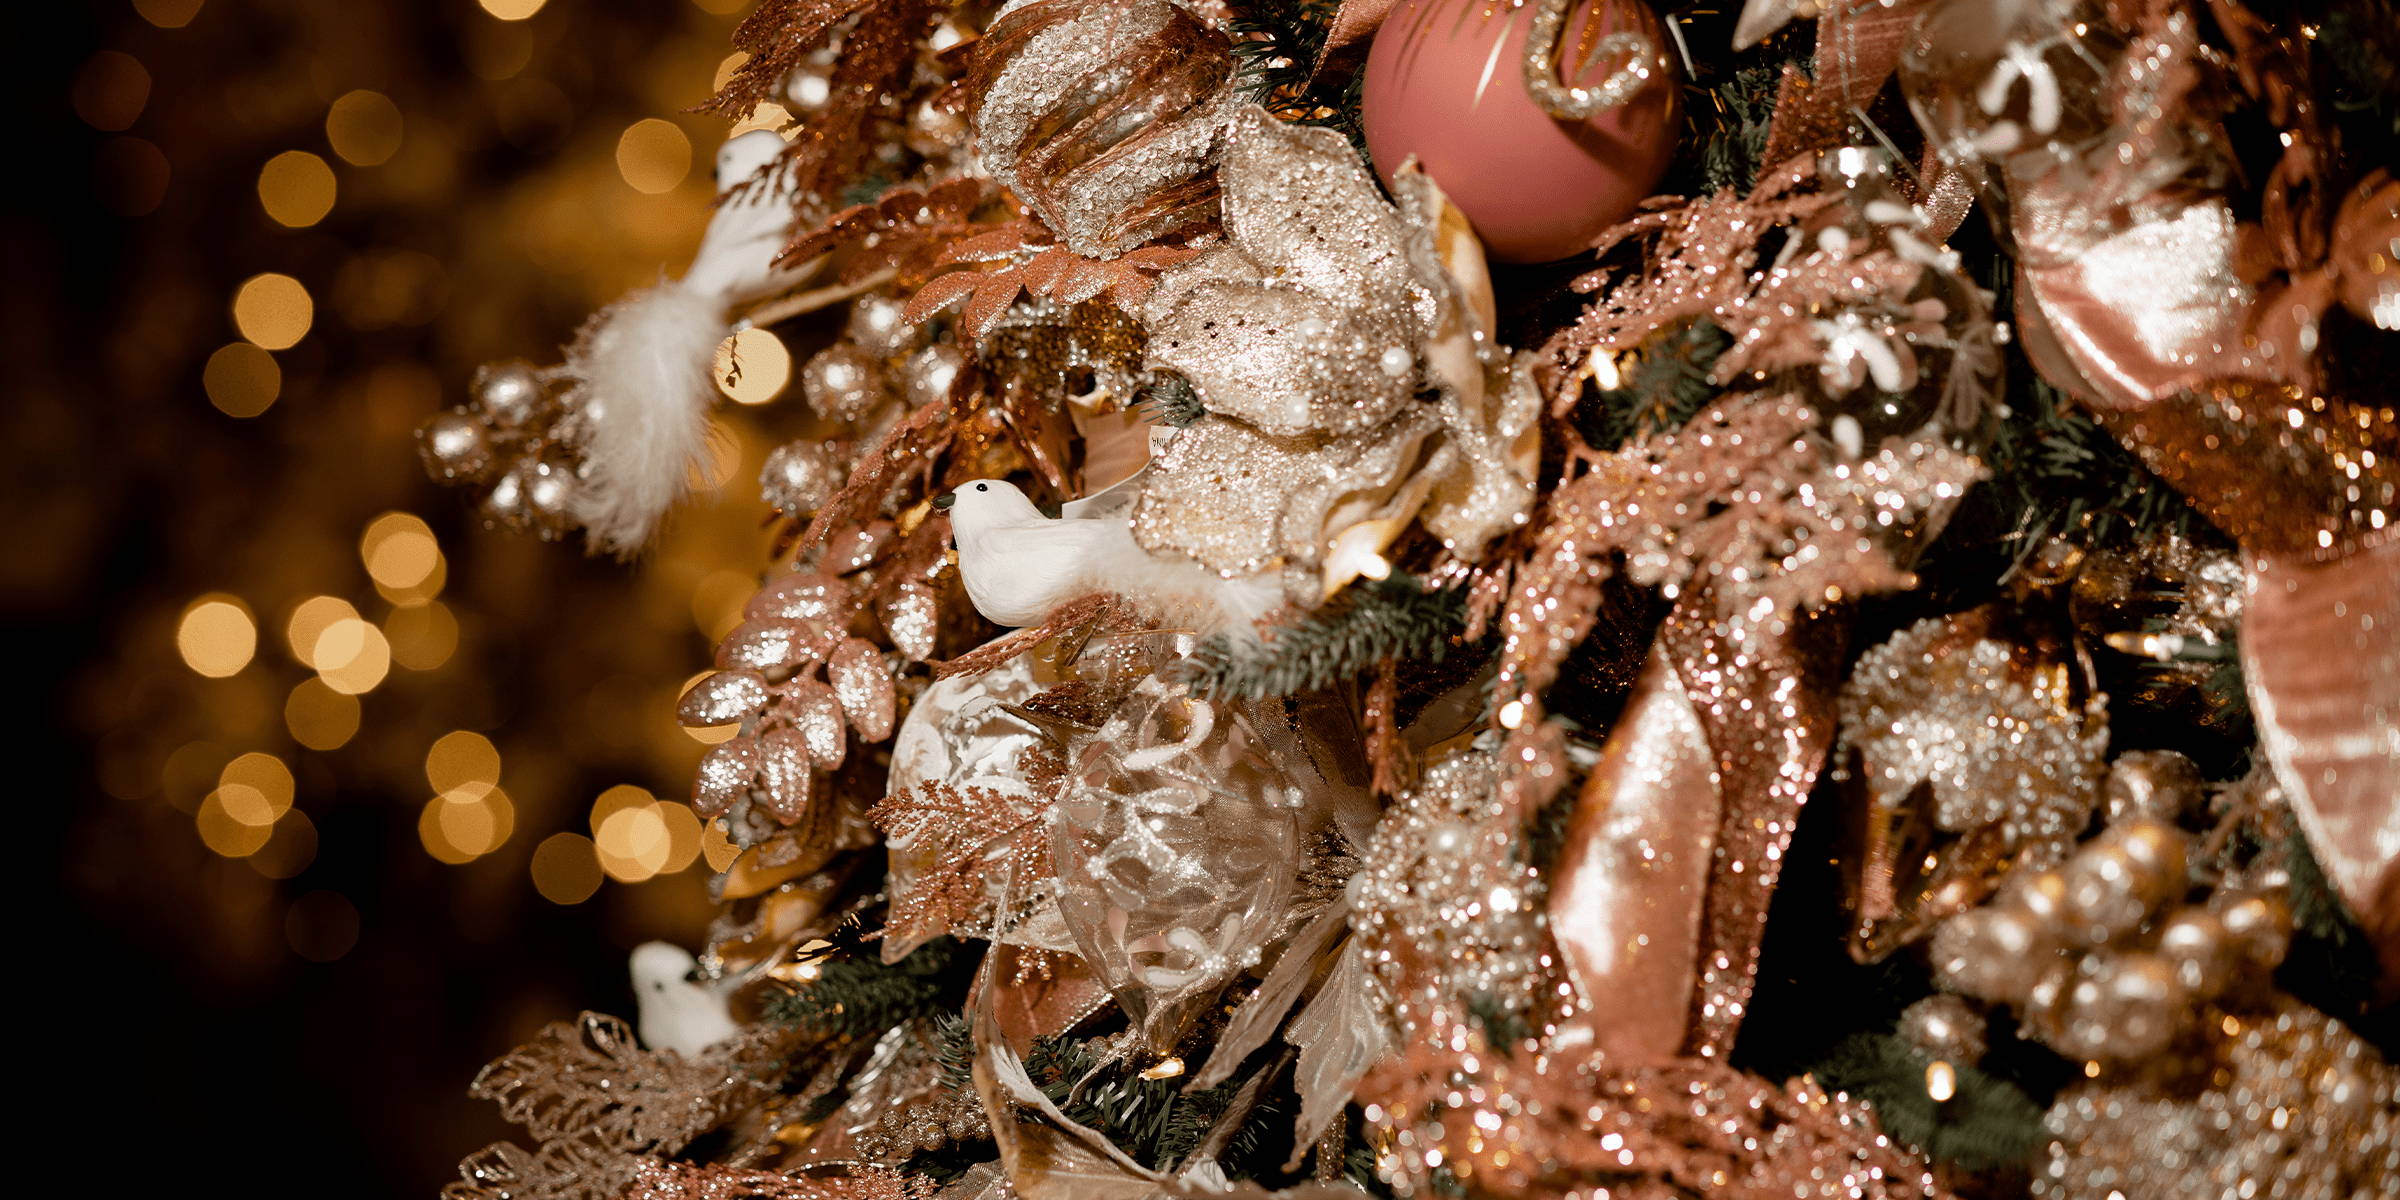 Christmas decor with shades of pink and rose gold accented by pearls